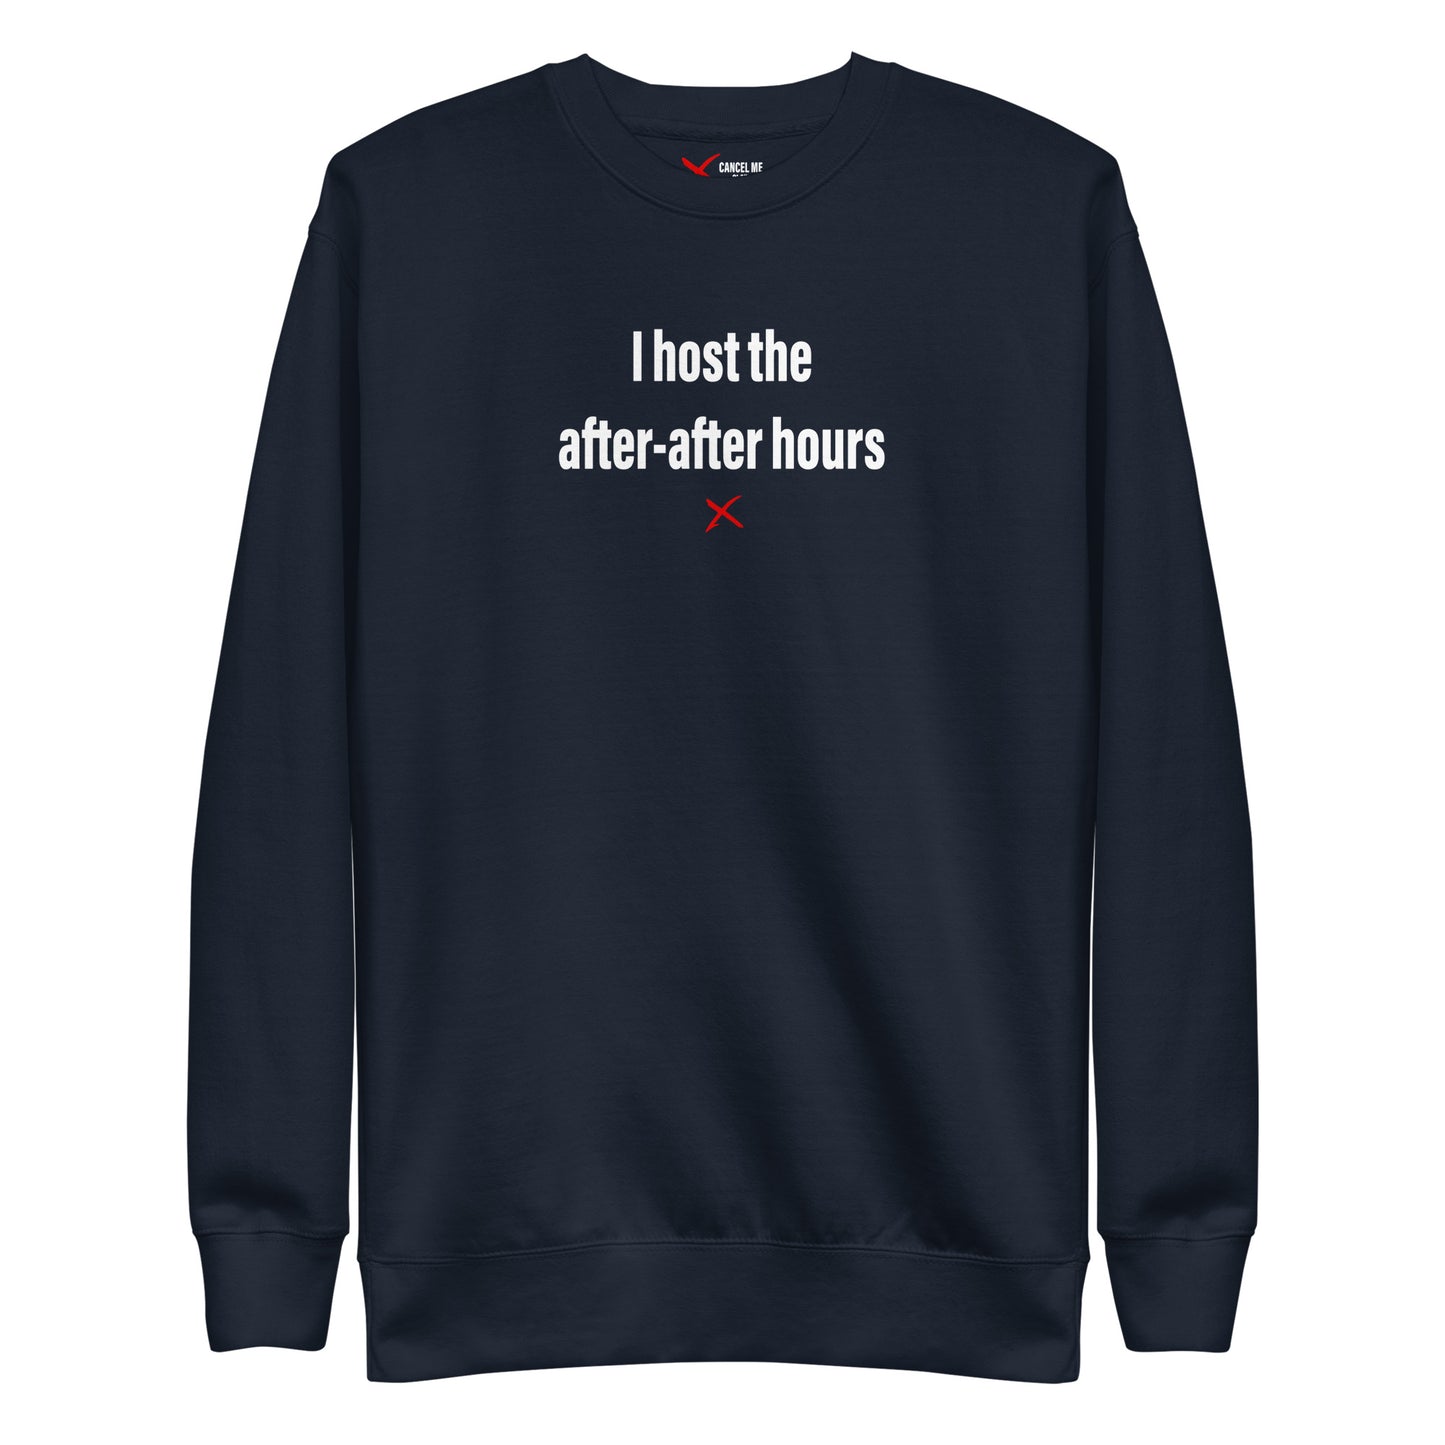 I host the after-after hours - Sweatshirt